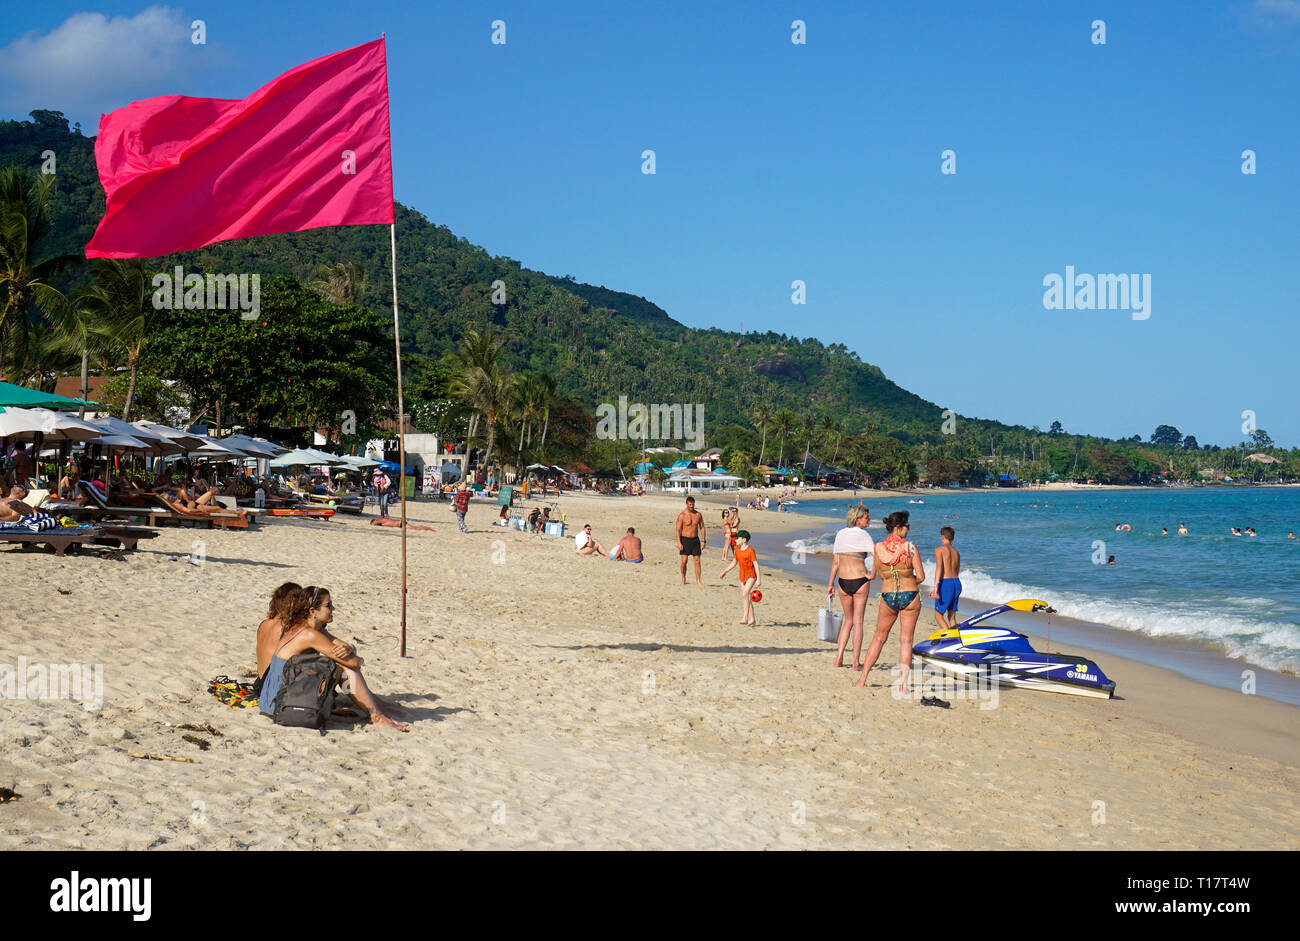 Red flag at Lamai Beach, warning of perilous swimming conditions, Koh Samui, Gulf of Thailand, Thailand Stock Photo